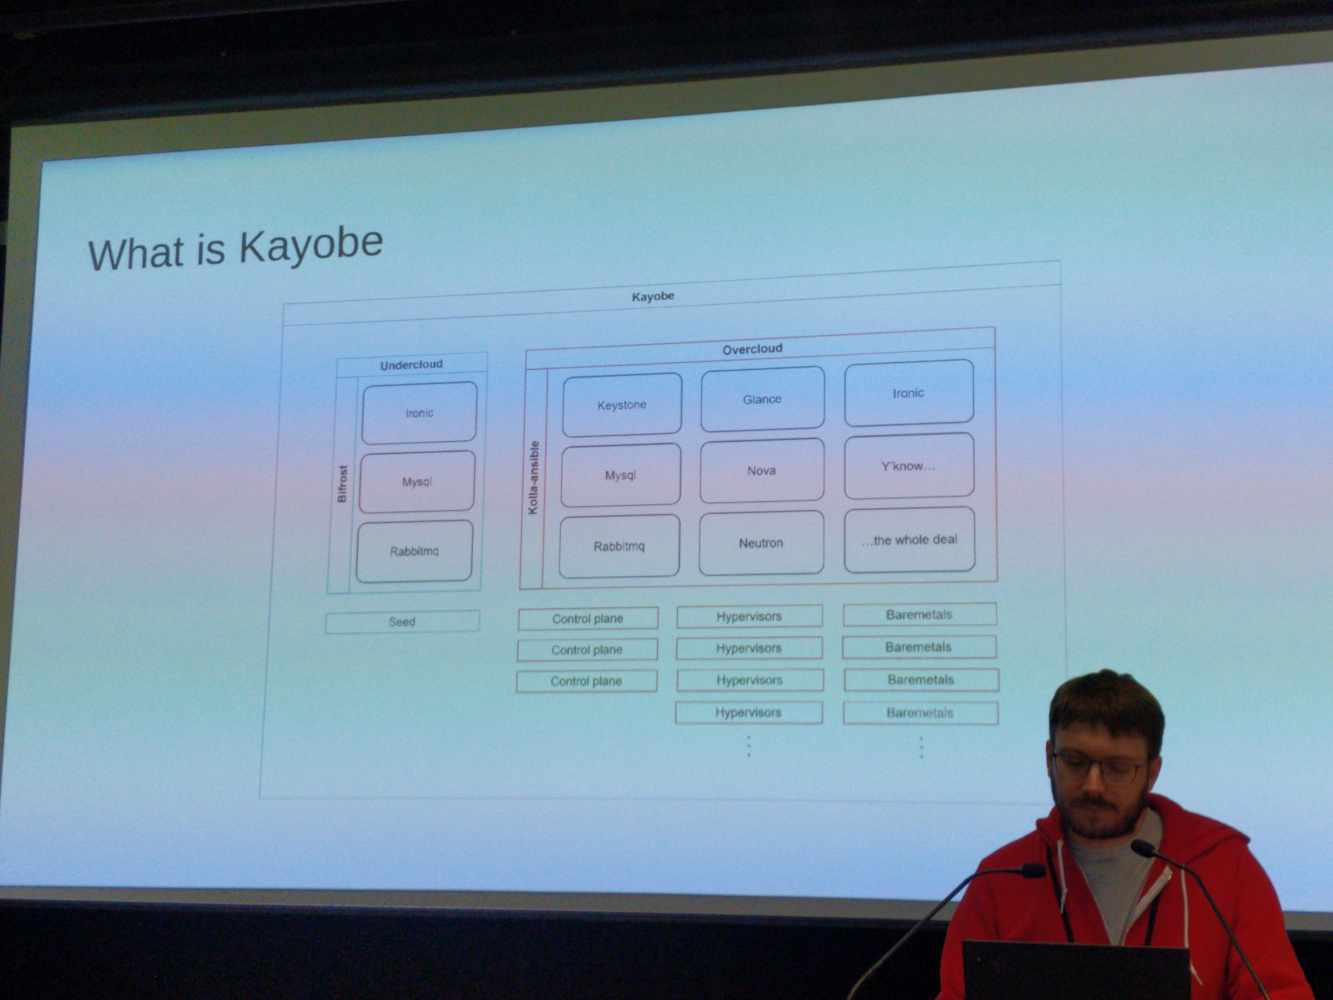 Léo Gillot-Lamure presenting his use of Kayobe to deploy OpenStack on his home lab